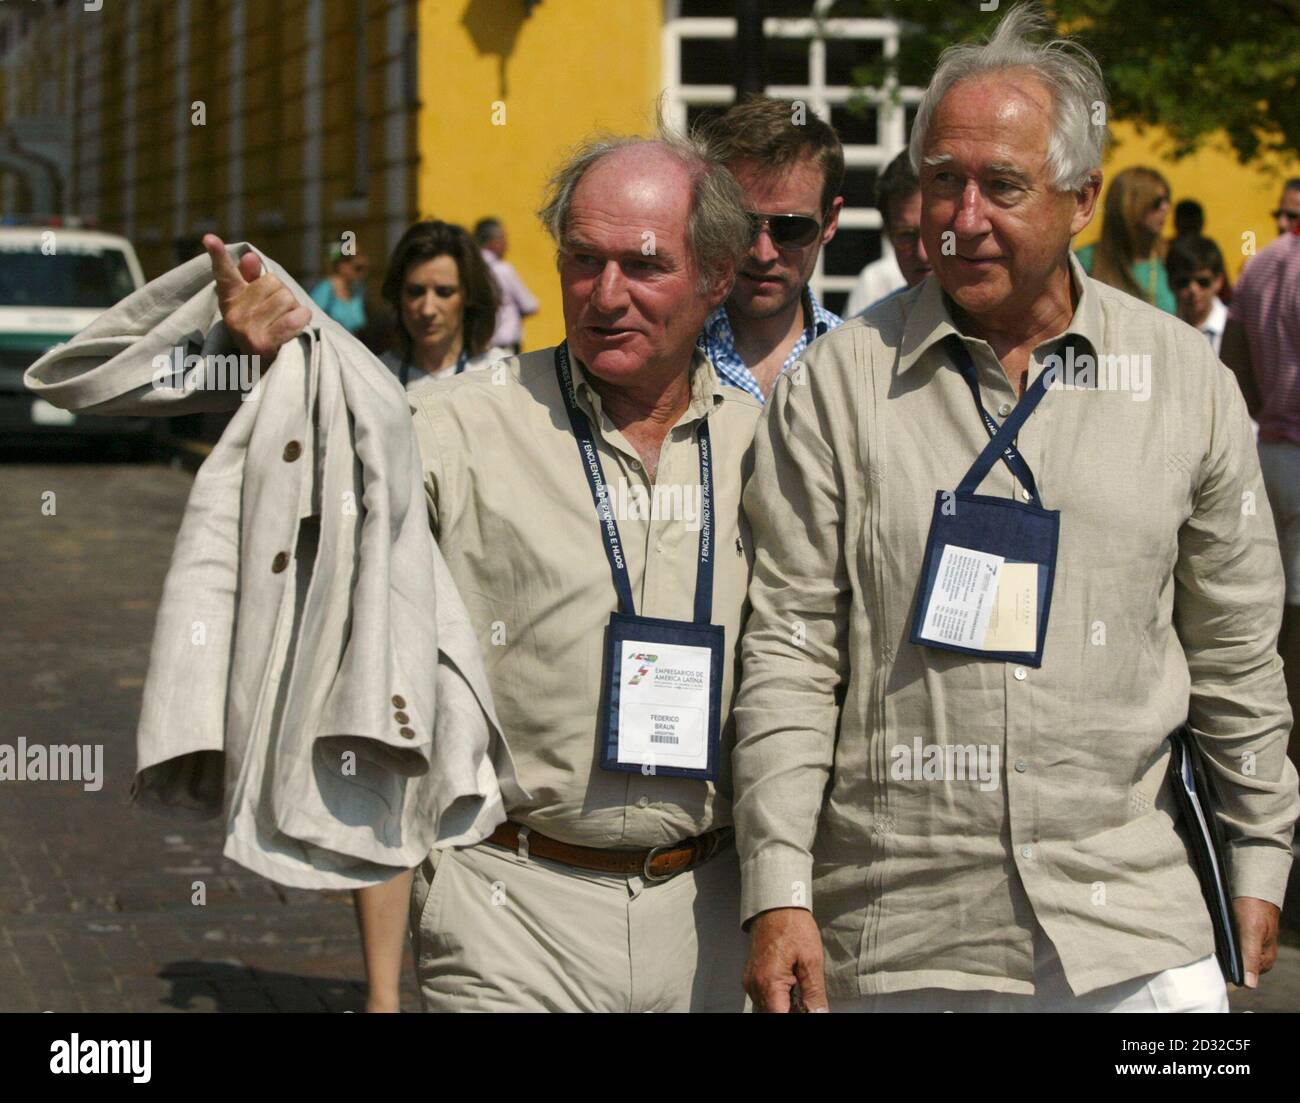 Argentine millionaire Federico Braun (L) and Chile's Horst Paulmann walk  after a meeting with Colombia's President Alvaro Uribe in Cartagena March  10, 2009. Some of Latin America's richest businessmen are meeting in